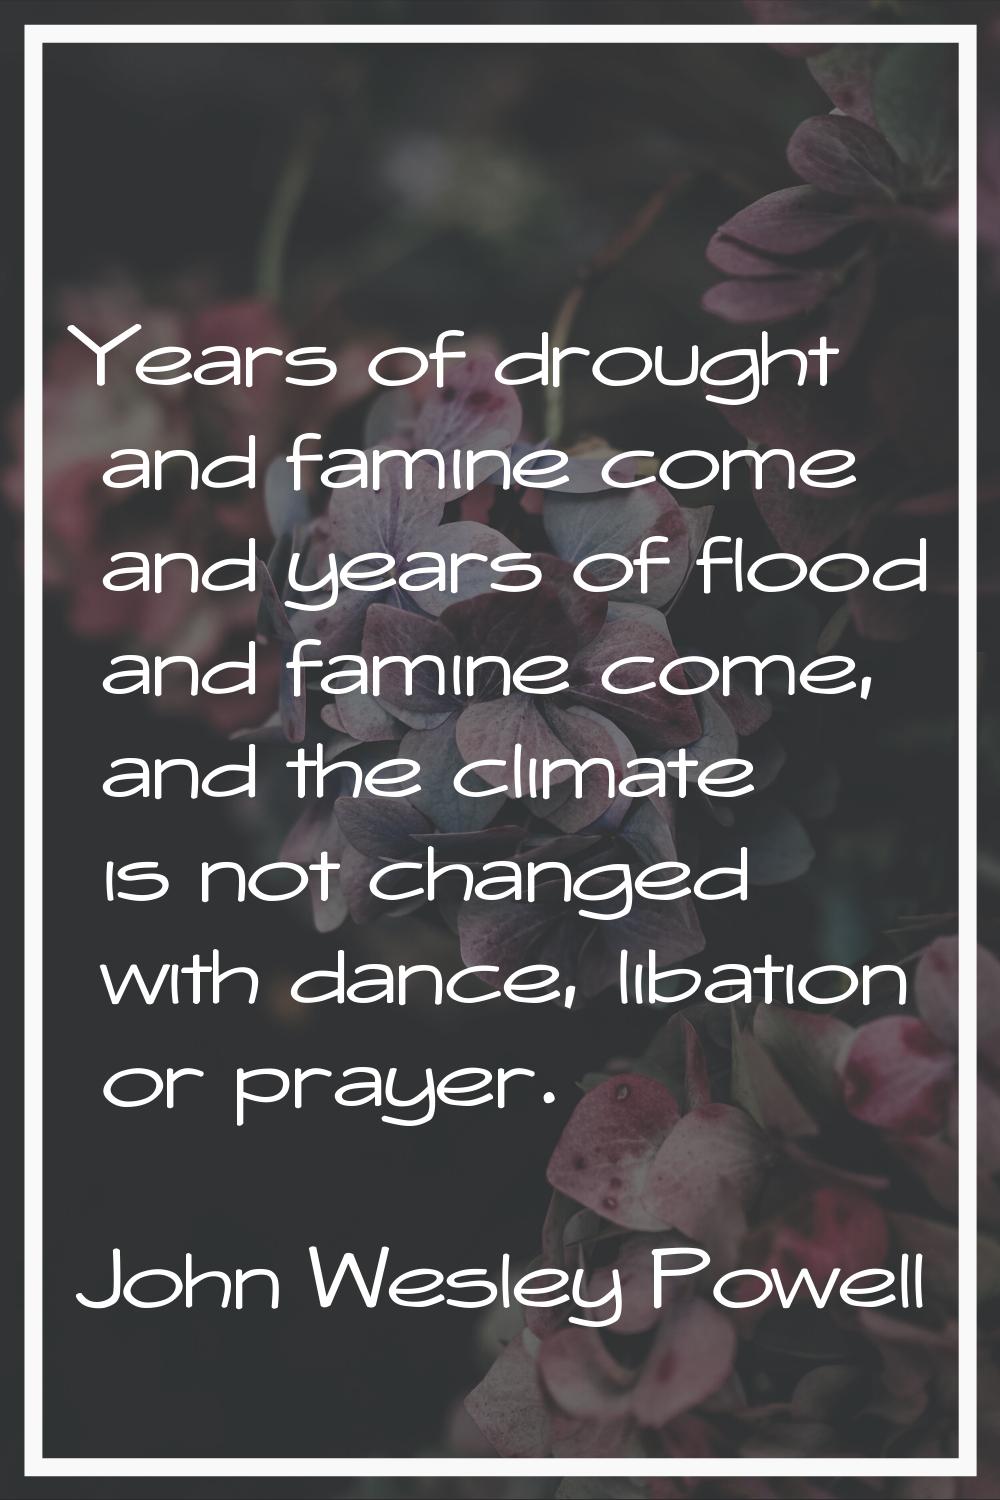 Years of drought and famine come and years of flood and famine come, and the climate is not changed